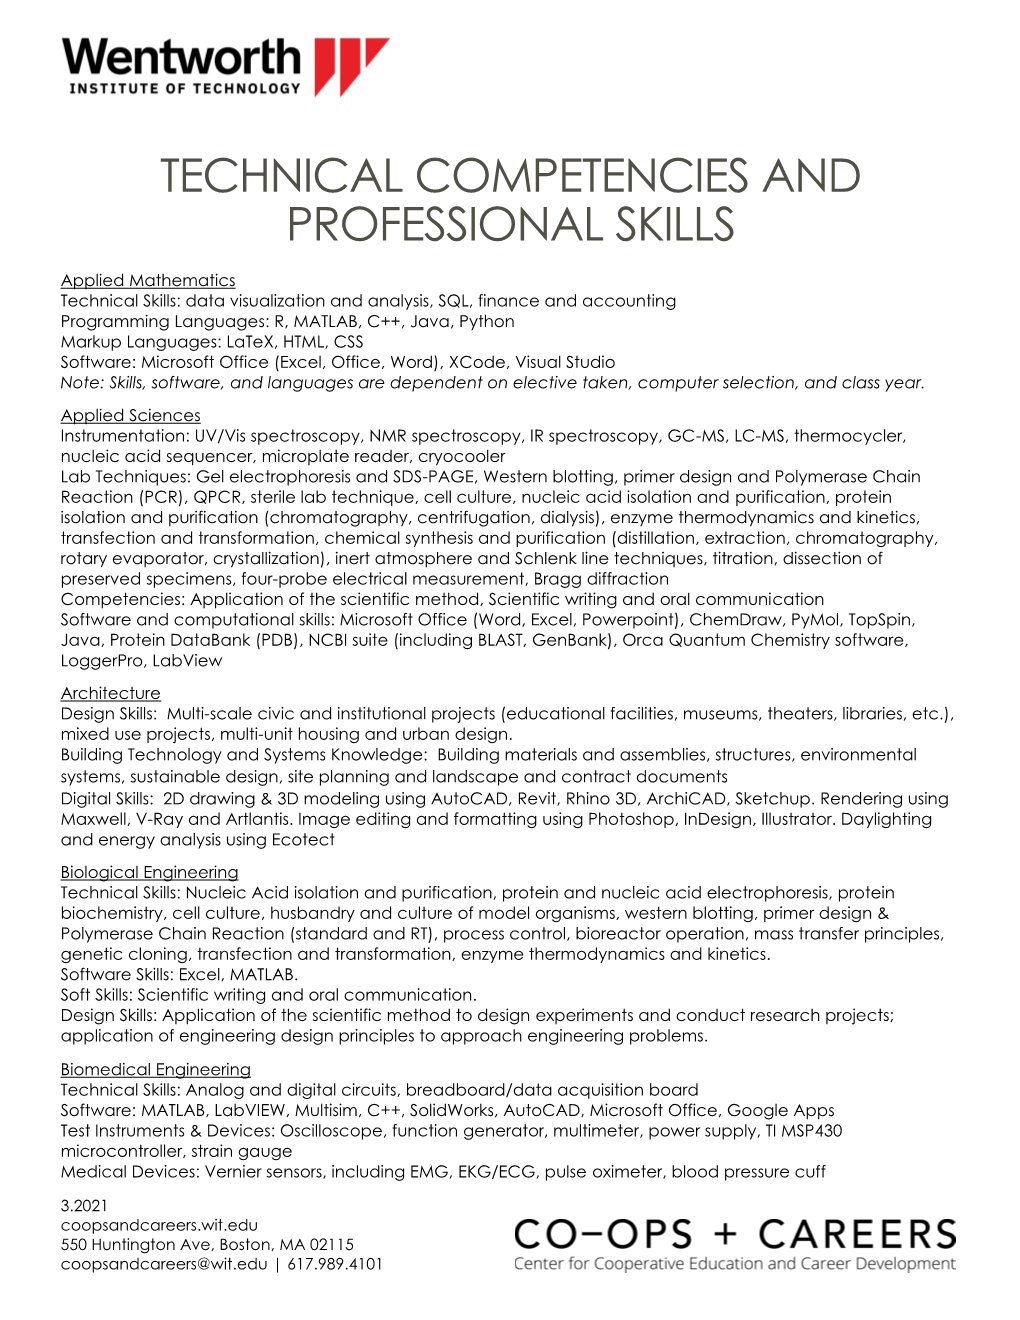 Technical Competencies and Professional Skills